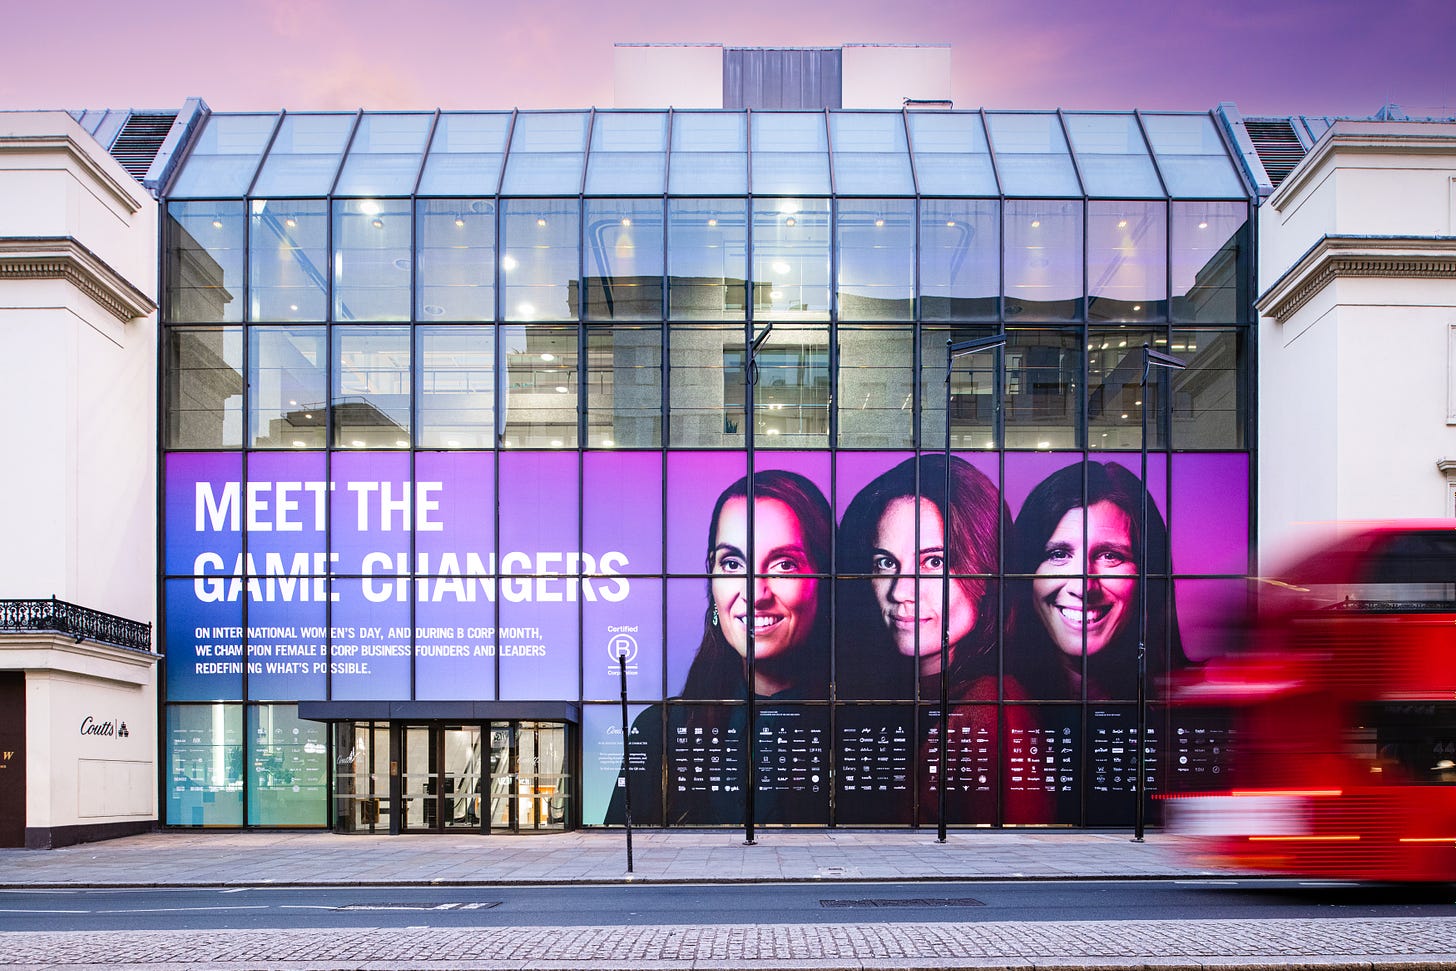 The image is a photo of the window of Coutts bank in central London with a display of female-founded B Corps to celebrate International Women's Day